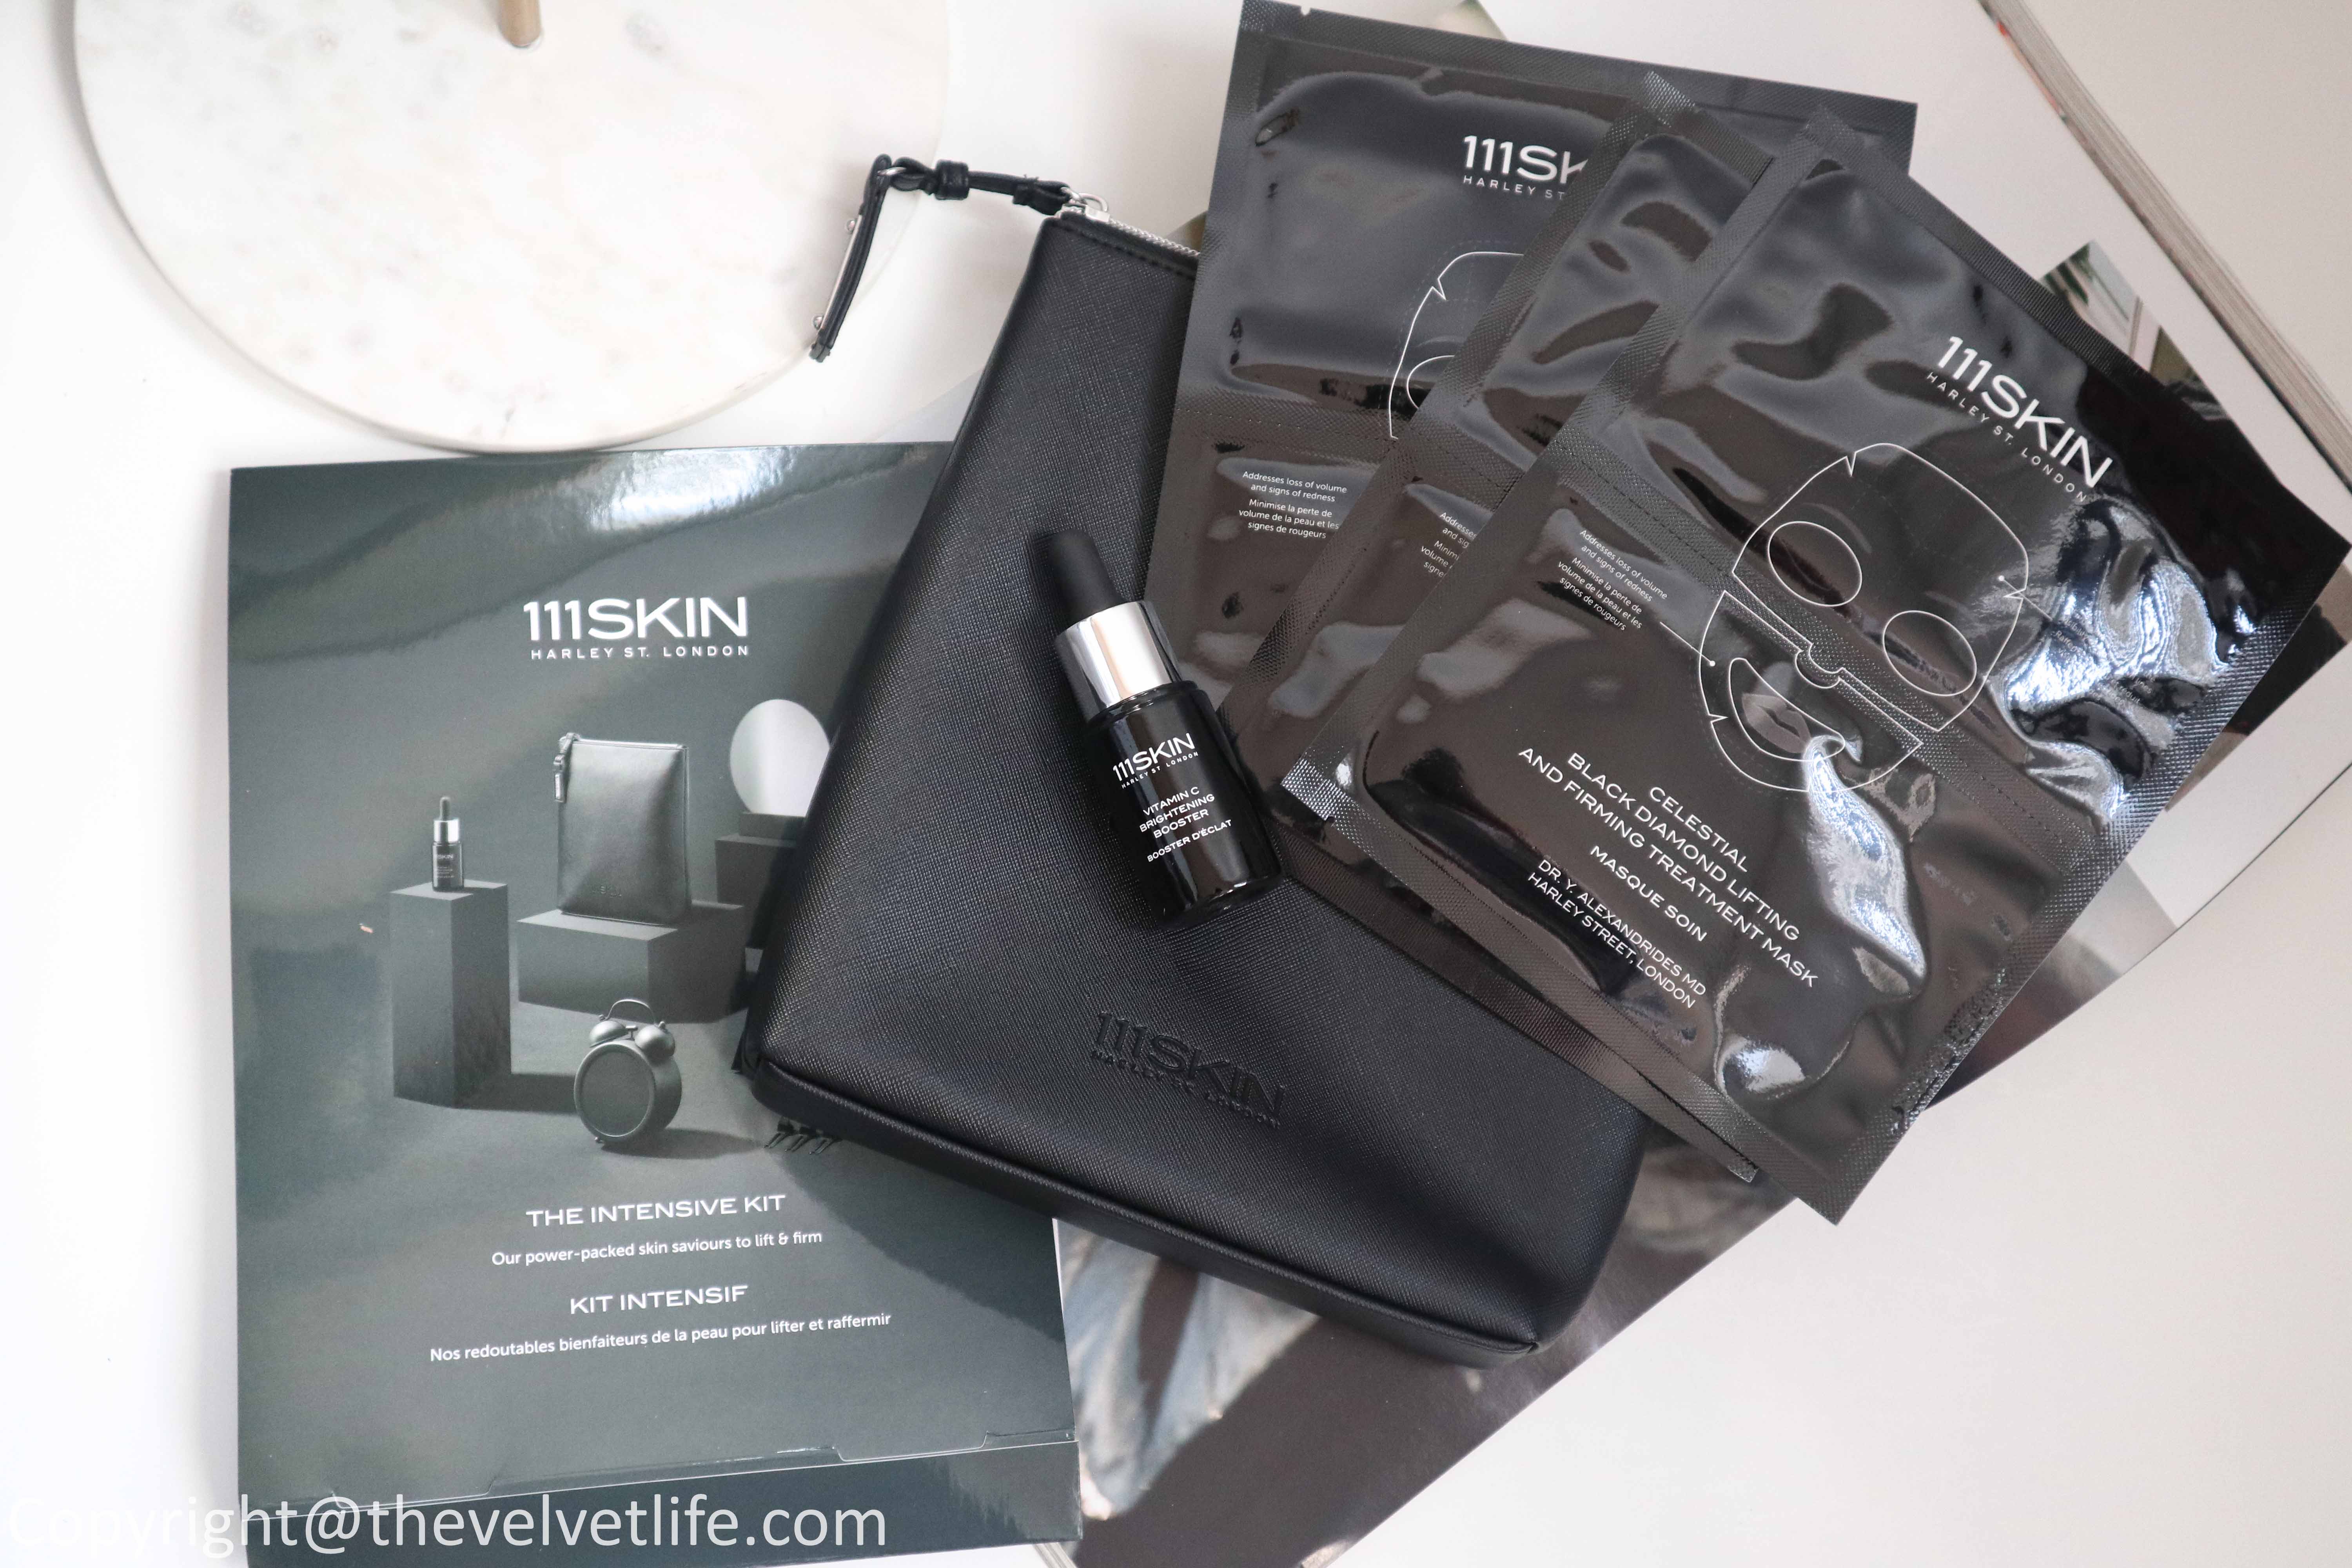 111Skin review The Intensive Kit Vitamin C Brightening Booster, Celestial Black Diamond Lifting and Firming Treatment Mask, 111Skin The Radiance Kit Rose Gold Illuminating Eye Mask, Rose Gold Brightening Facial Treatment Mask, Rose Gold Radiance Booster